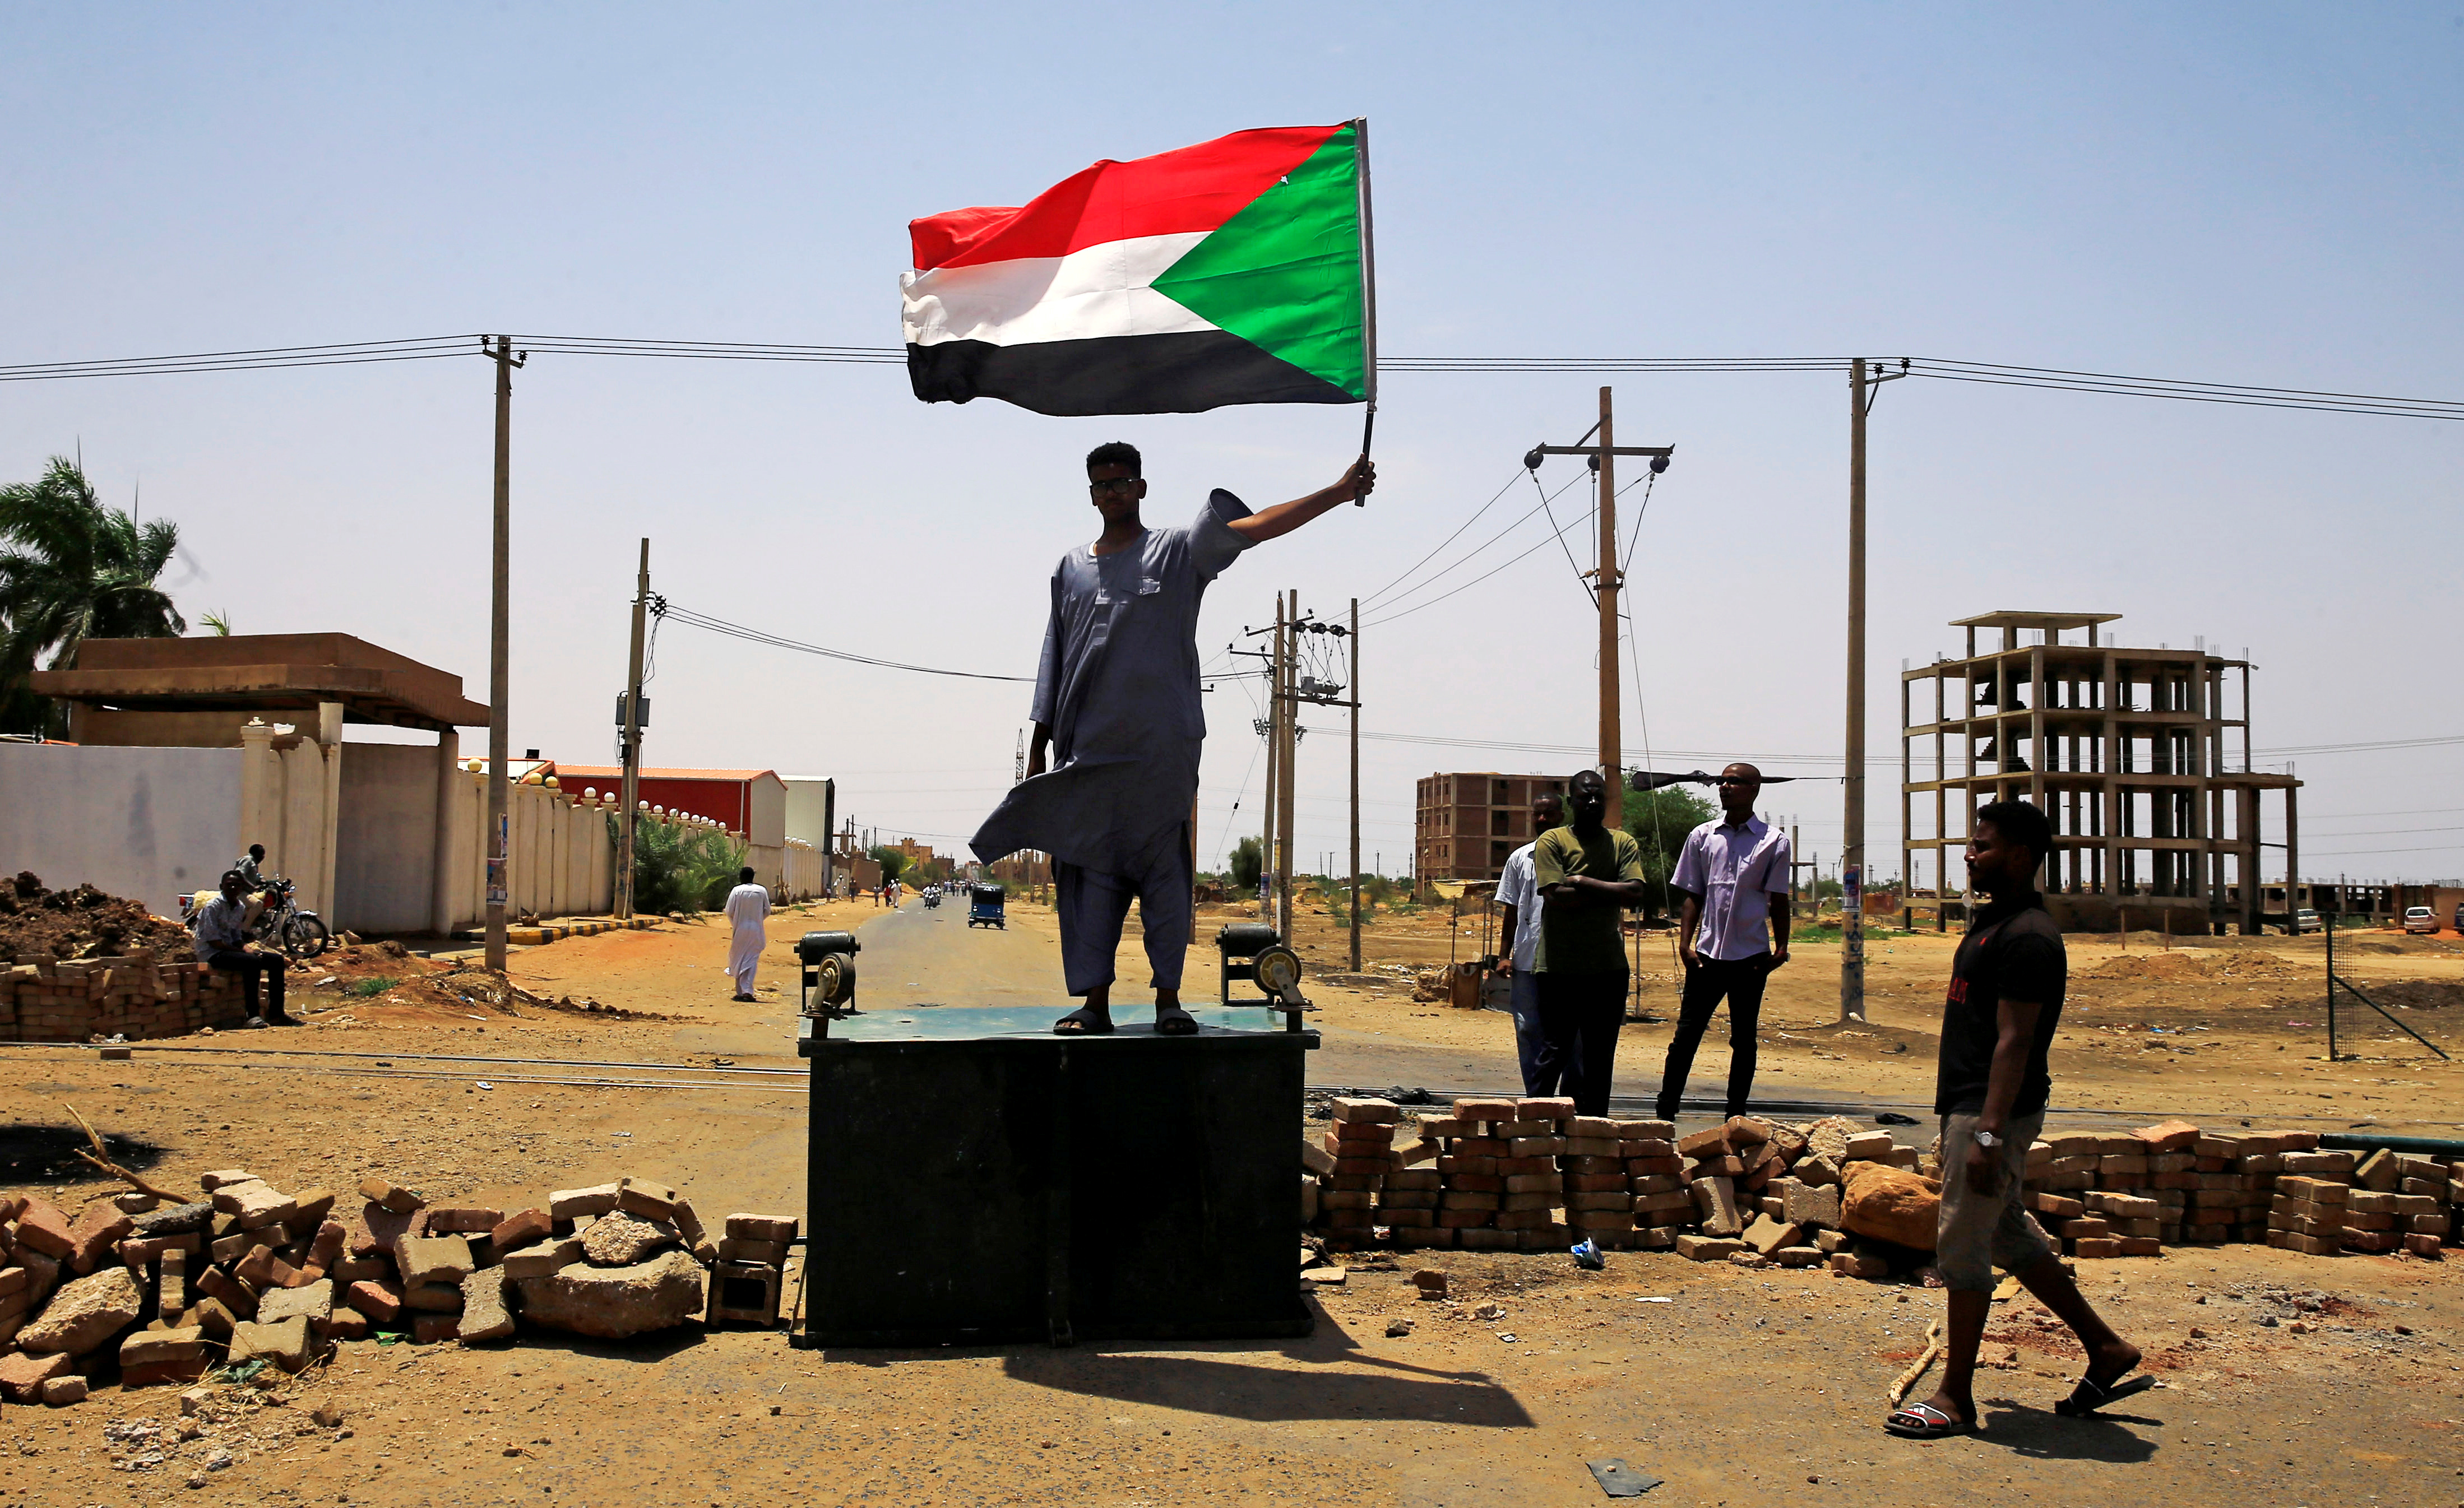 African cardinal calls for restraint in Sudan's dealings with protesters